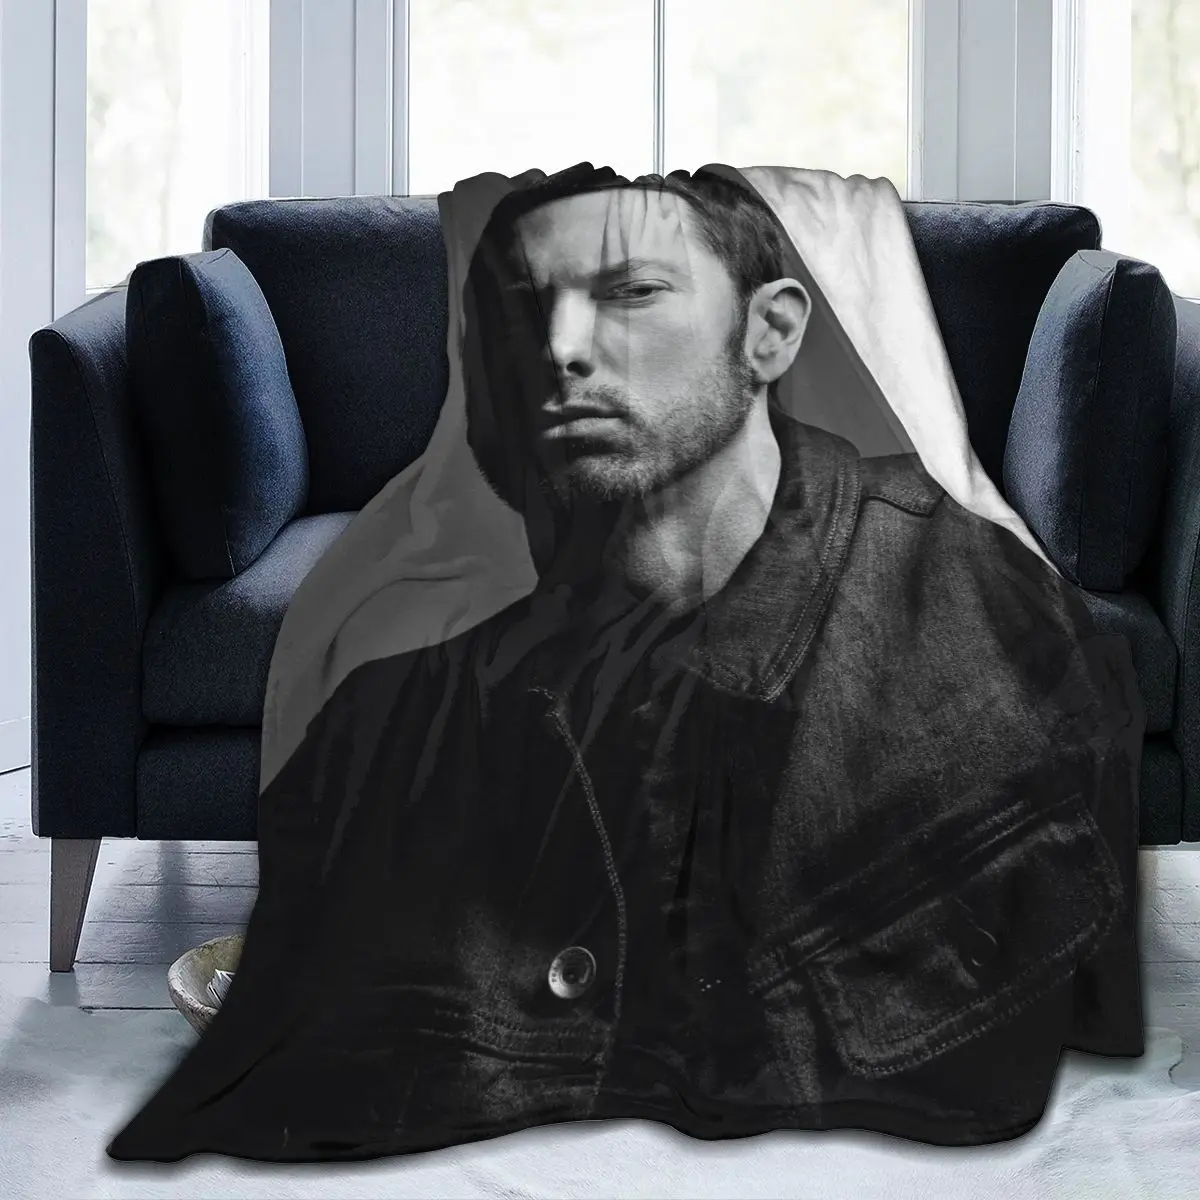 

Eminem sofa bedroom decorative warm blanket 3D printing air conditioning quilt star throwing sheets around children's gift